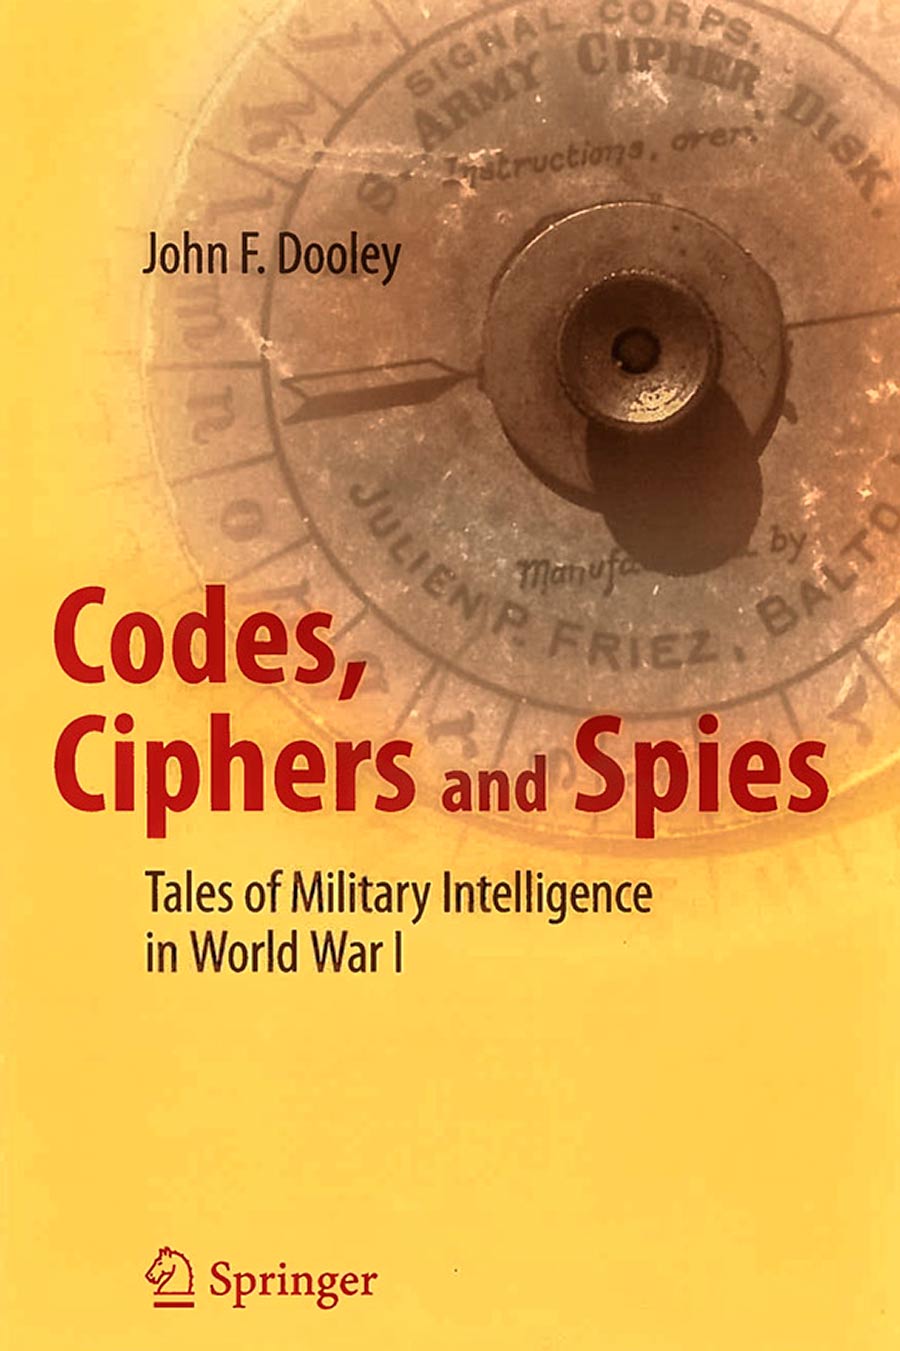 Cover of Codes, Ciphers and Spies, by John Dooley